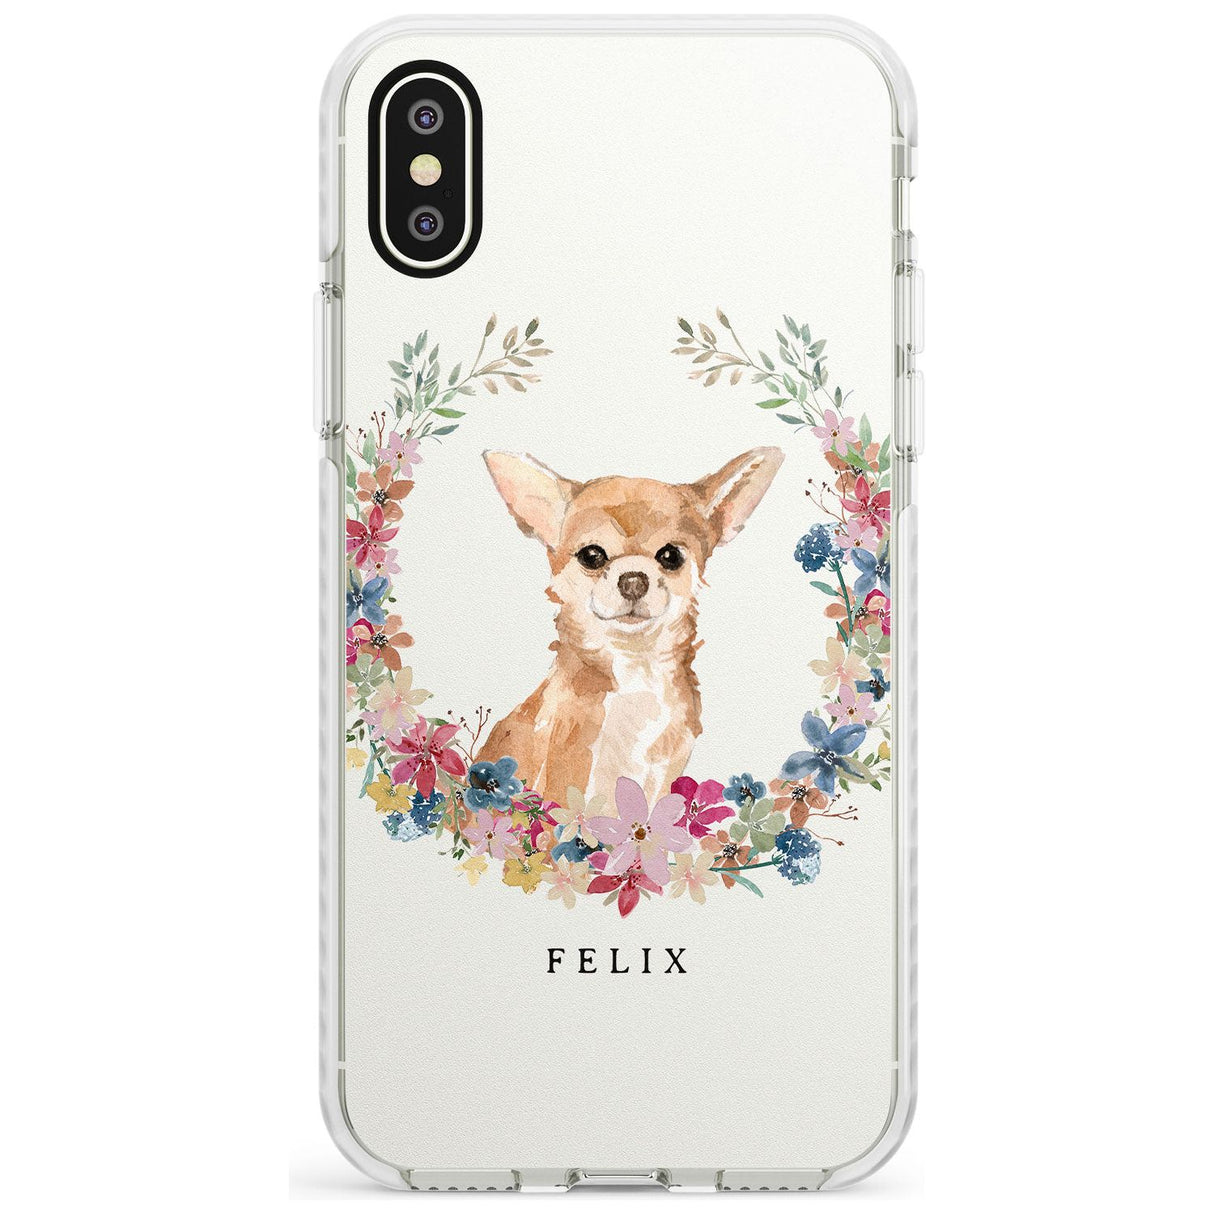 Chihuahua - Watercolour Dog Portrait Impact Phone Case for iPhone X XS Max XR